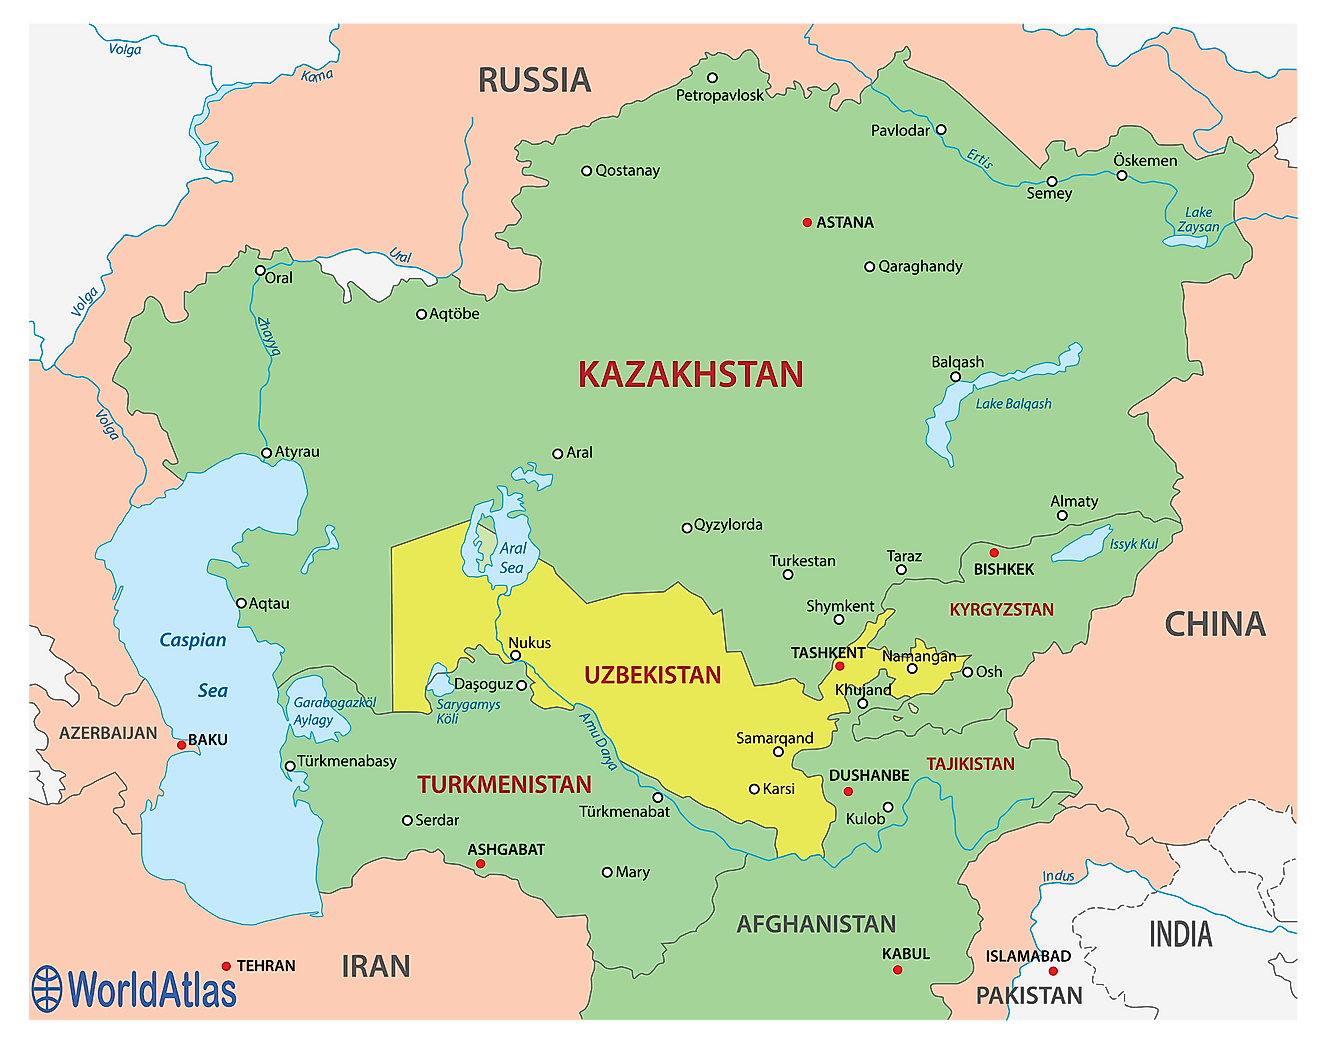 Uzbekistan, one of the two double landlocked countries is surrounded by countries that are themselves landlocked. 